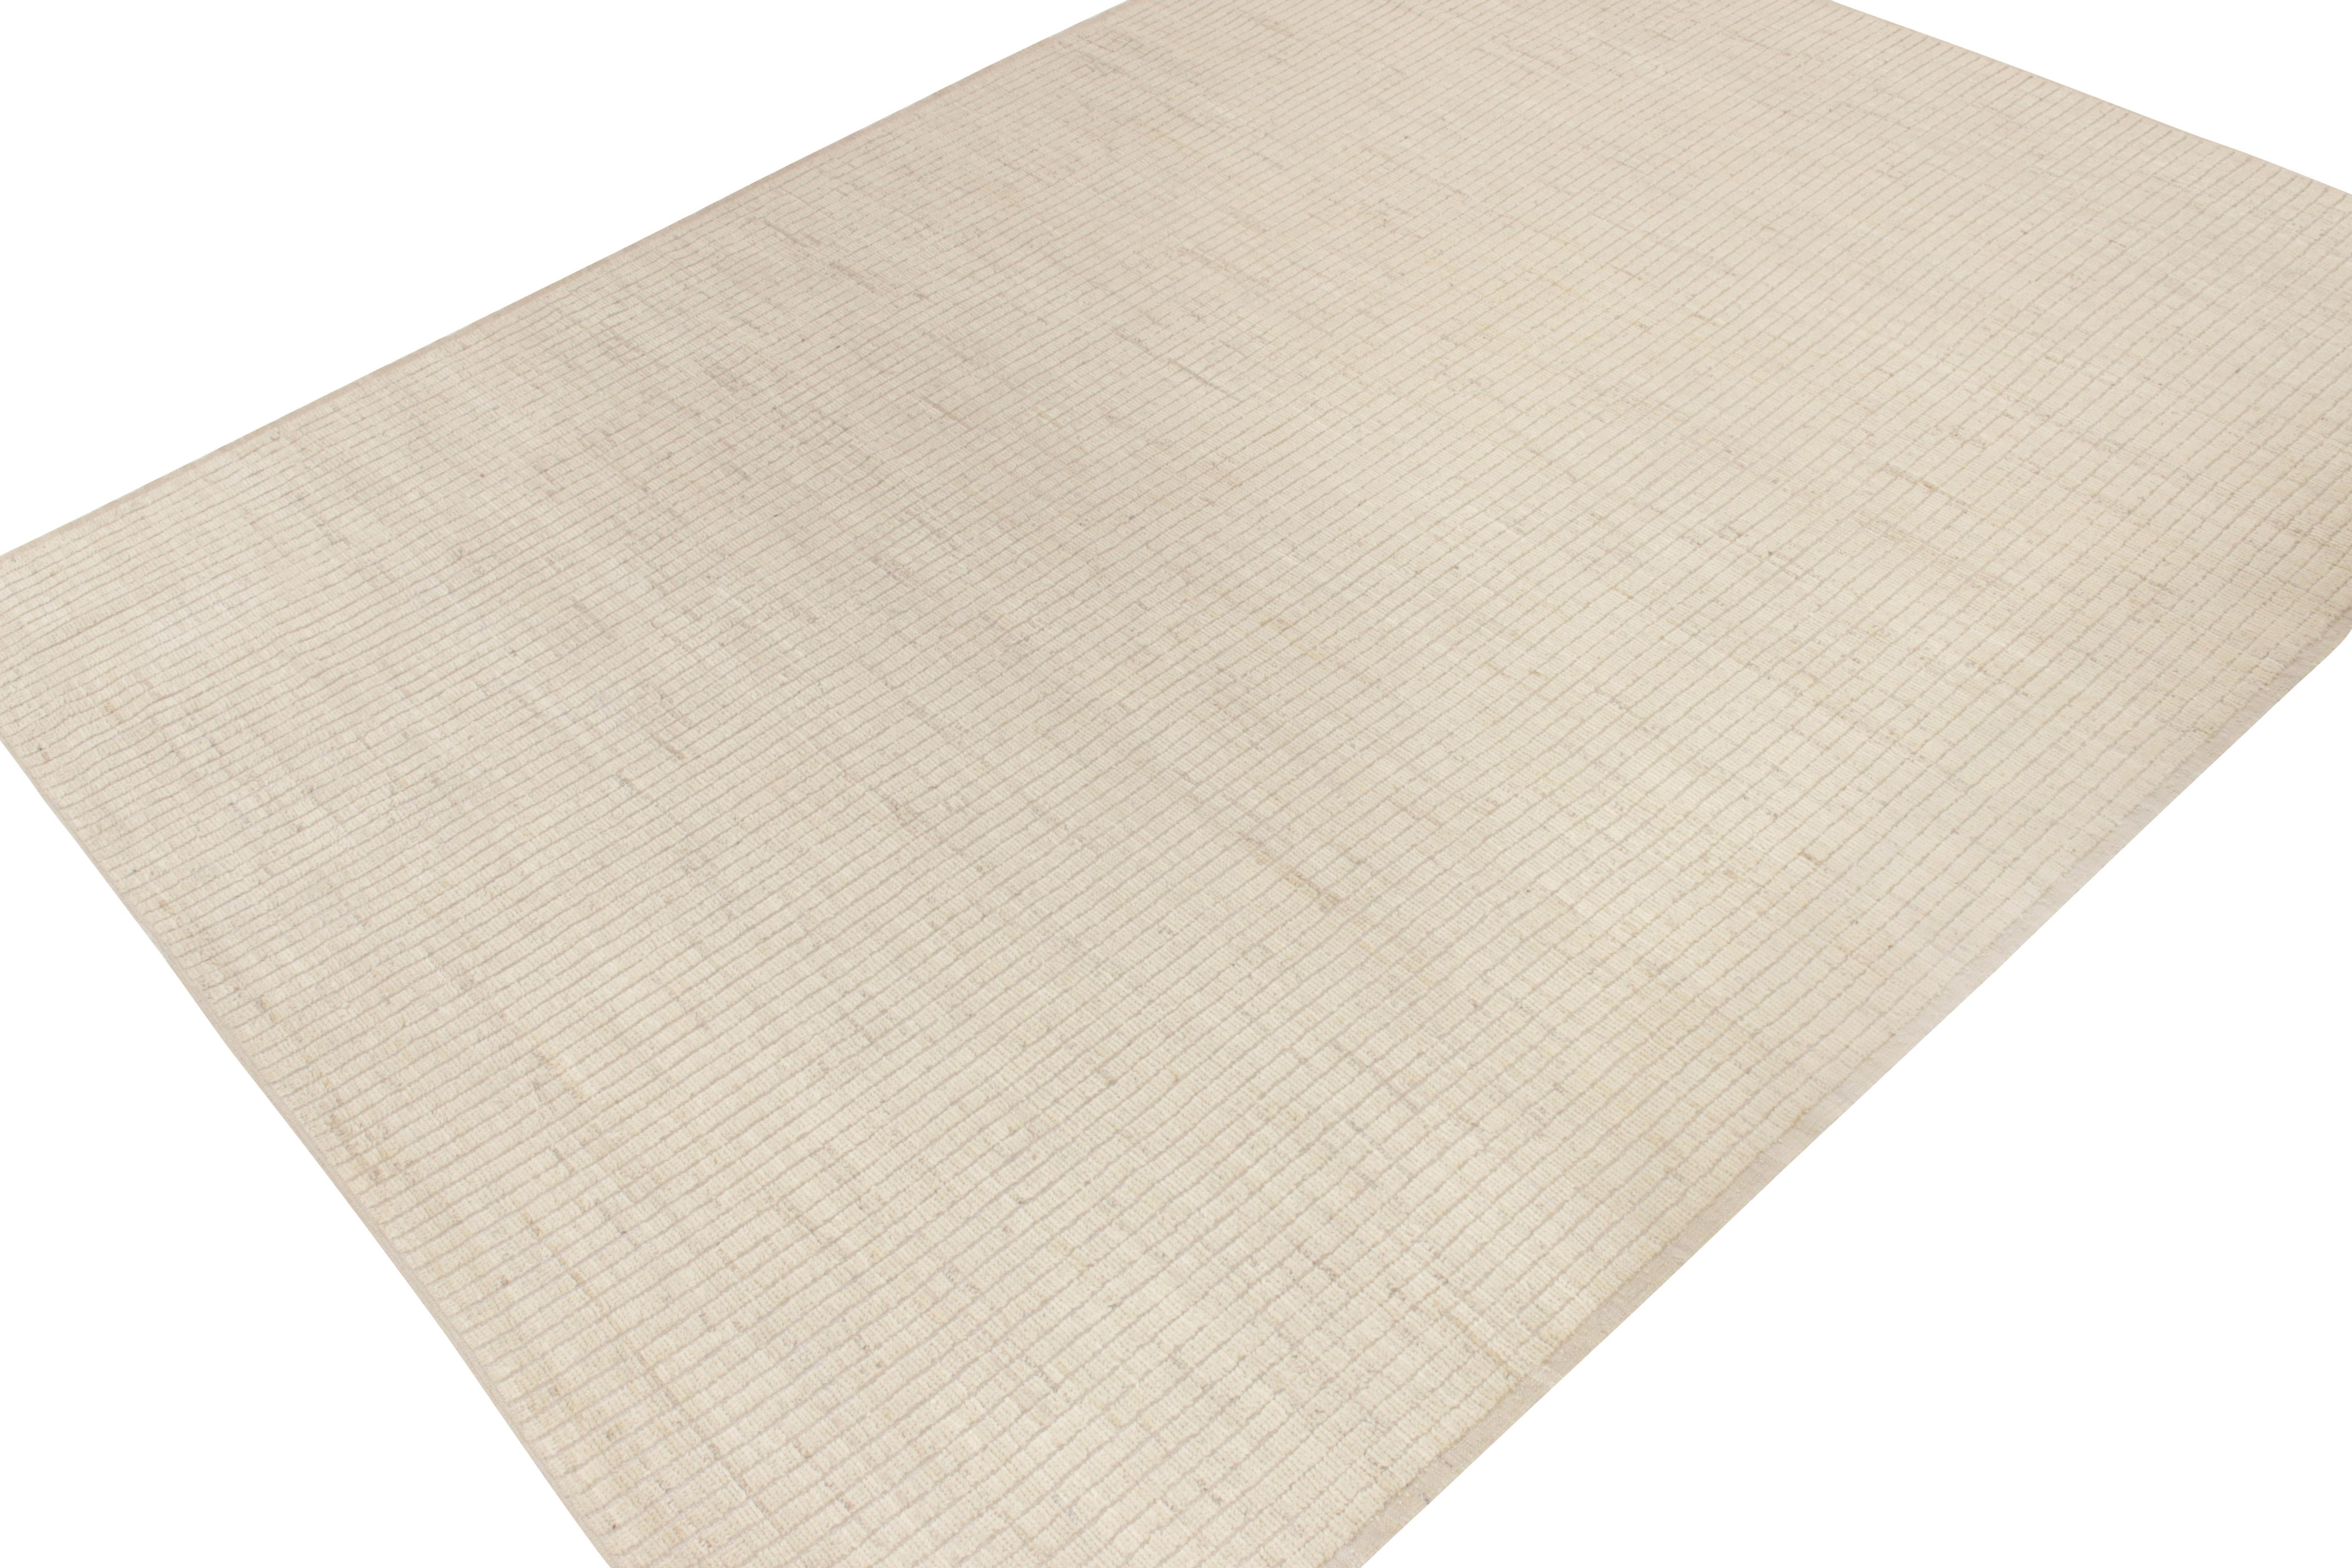 Afghan Rug & Kilim's Contemporary Rug in off White, Beige High-Low Geometric Pattern For Sale